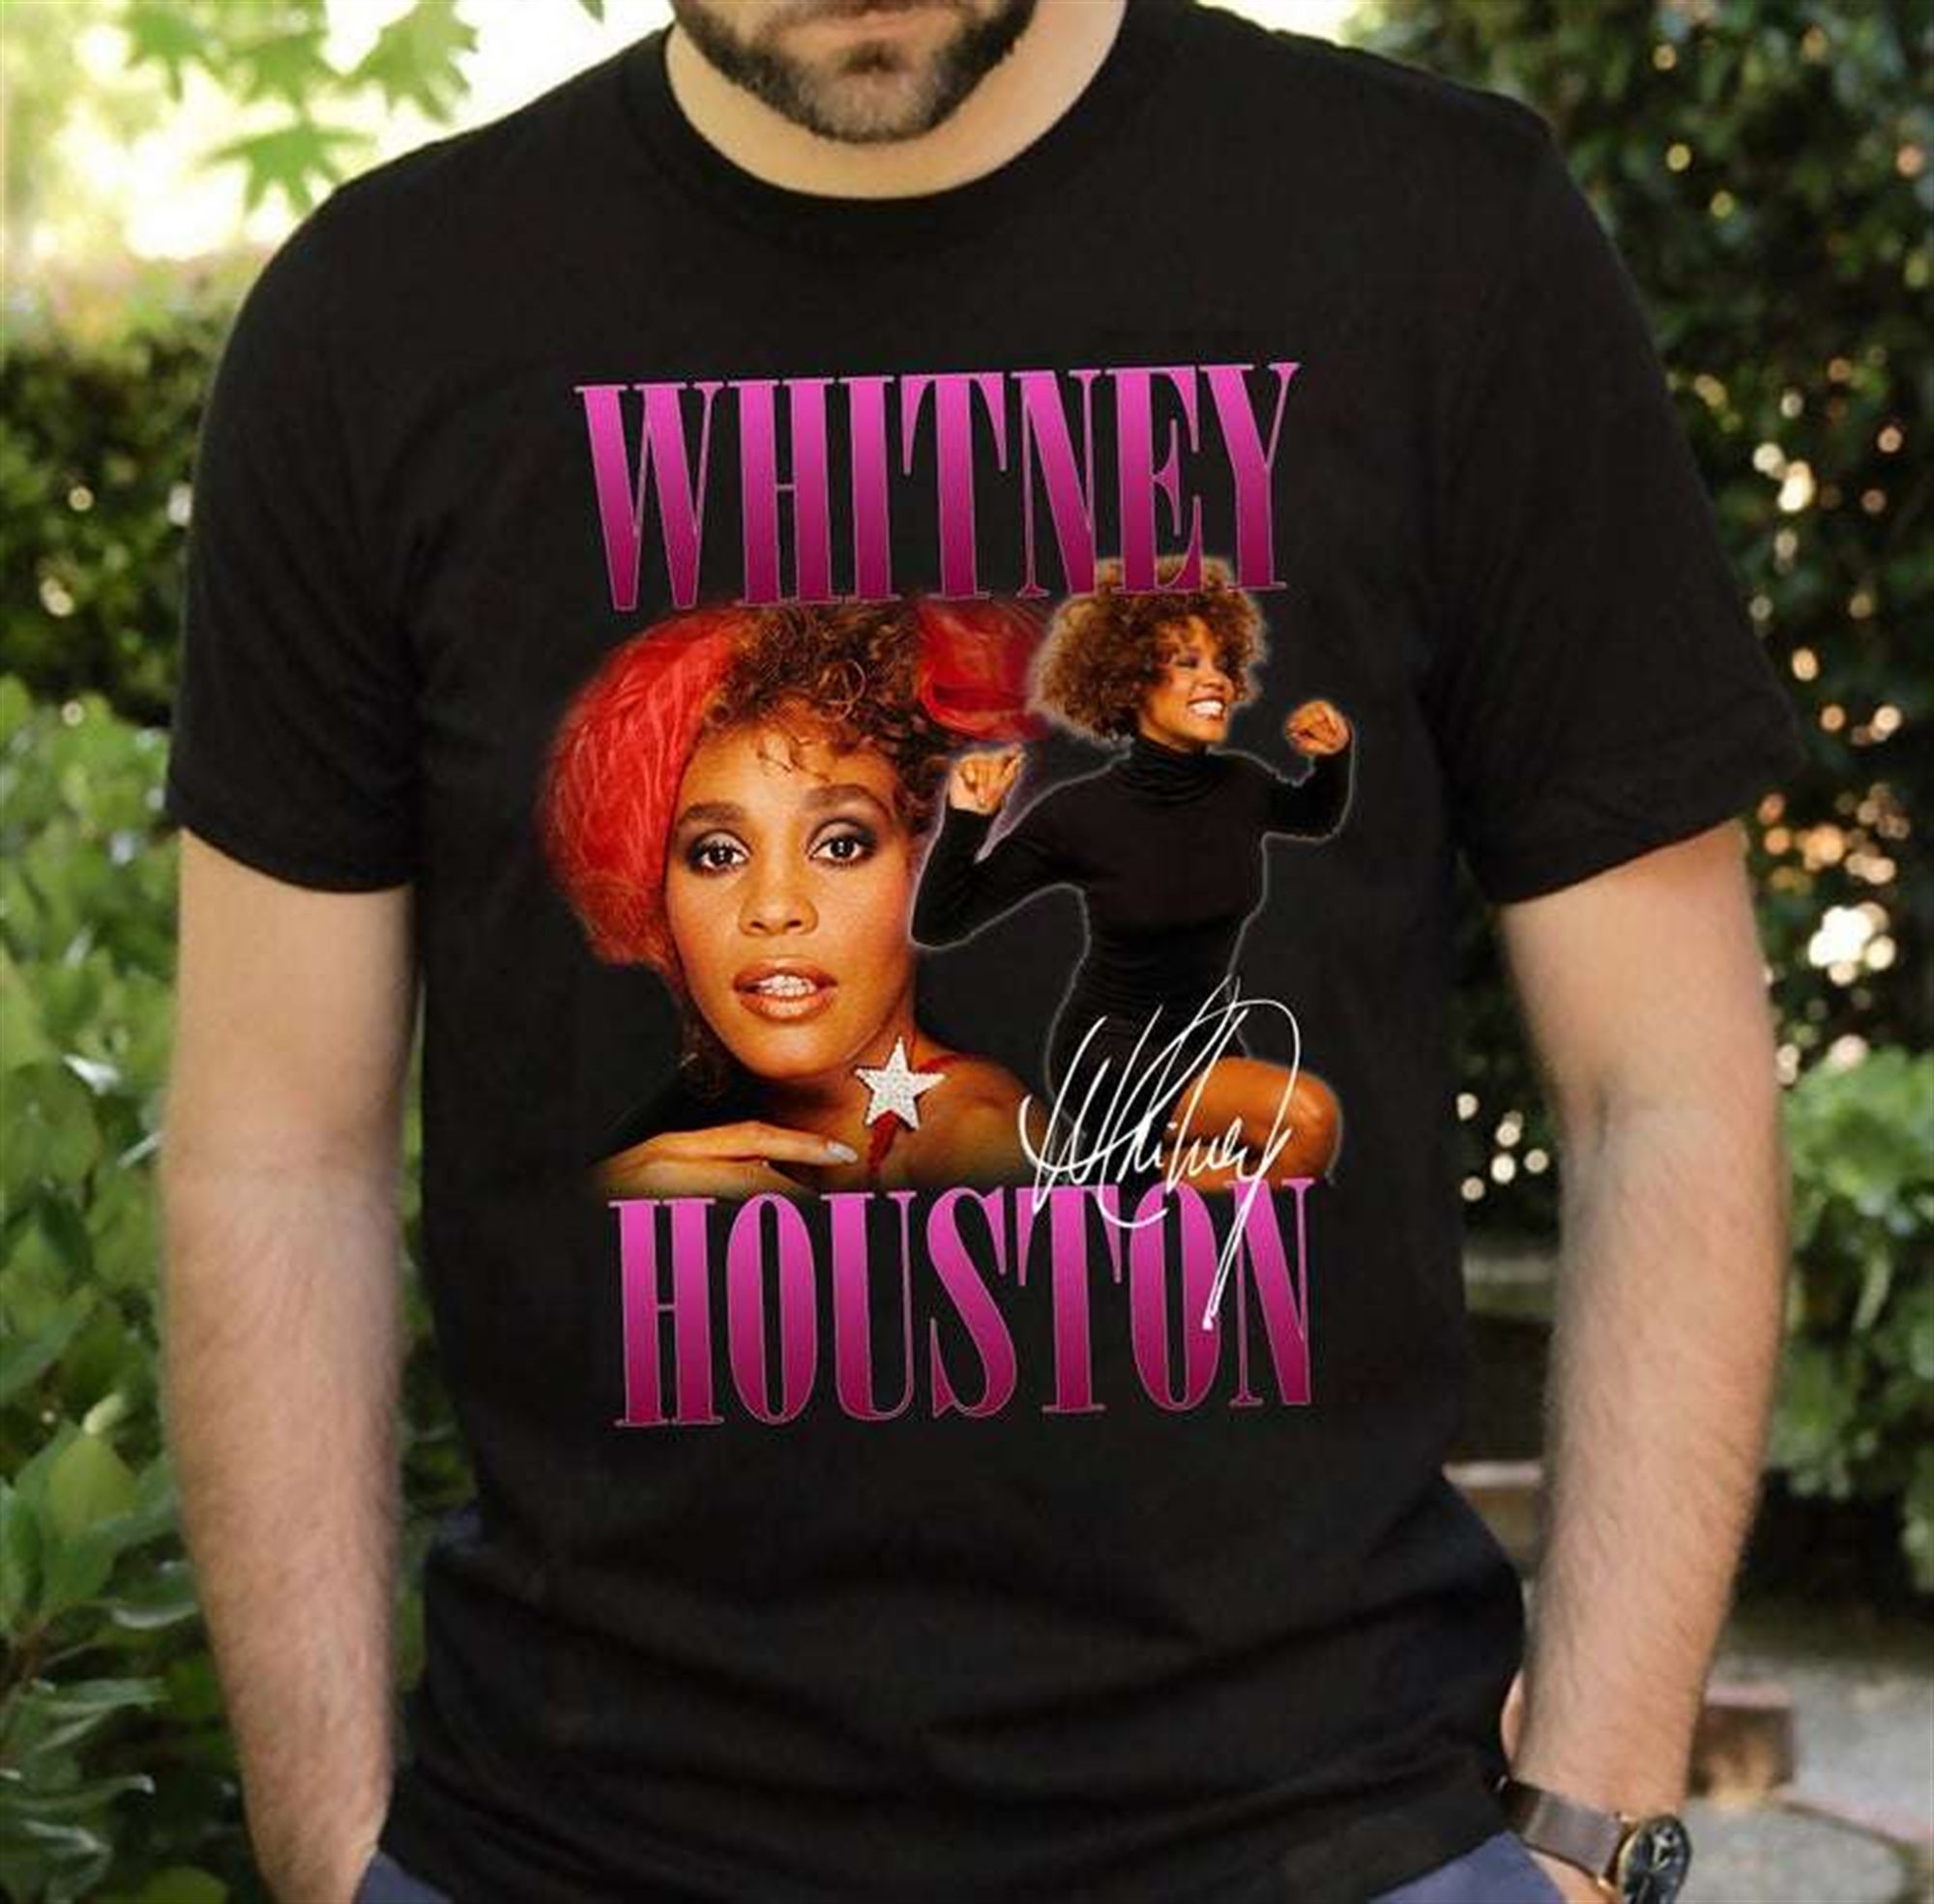 Vintage Whitney Houston 1987 The Moment T Shirt Size Up To 5xl